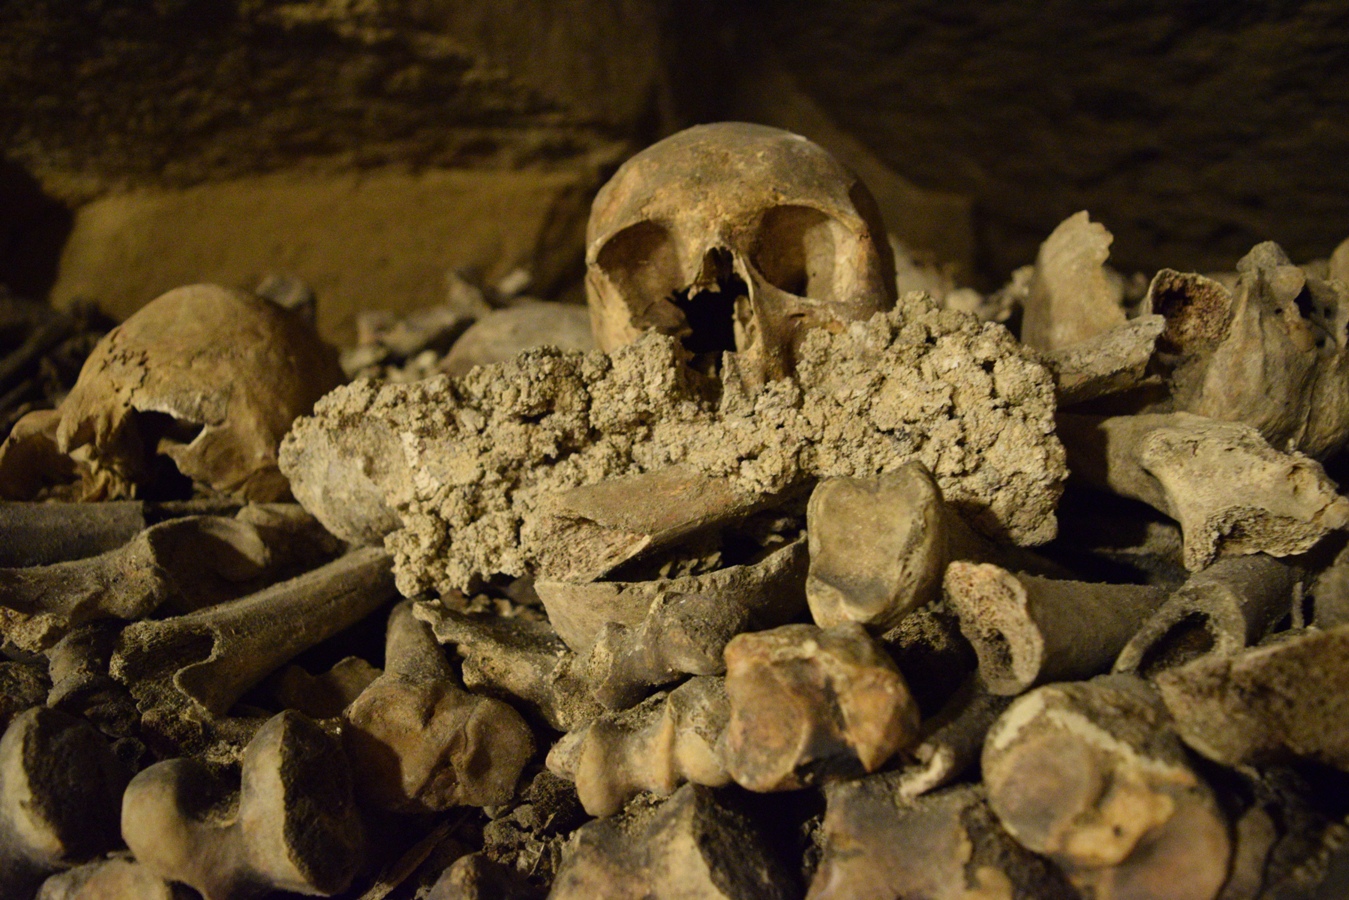 Photo diary: Catacombs of Paris | The Cheerful Wanderer